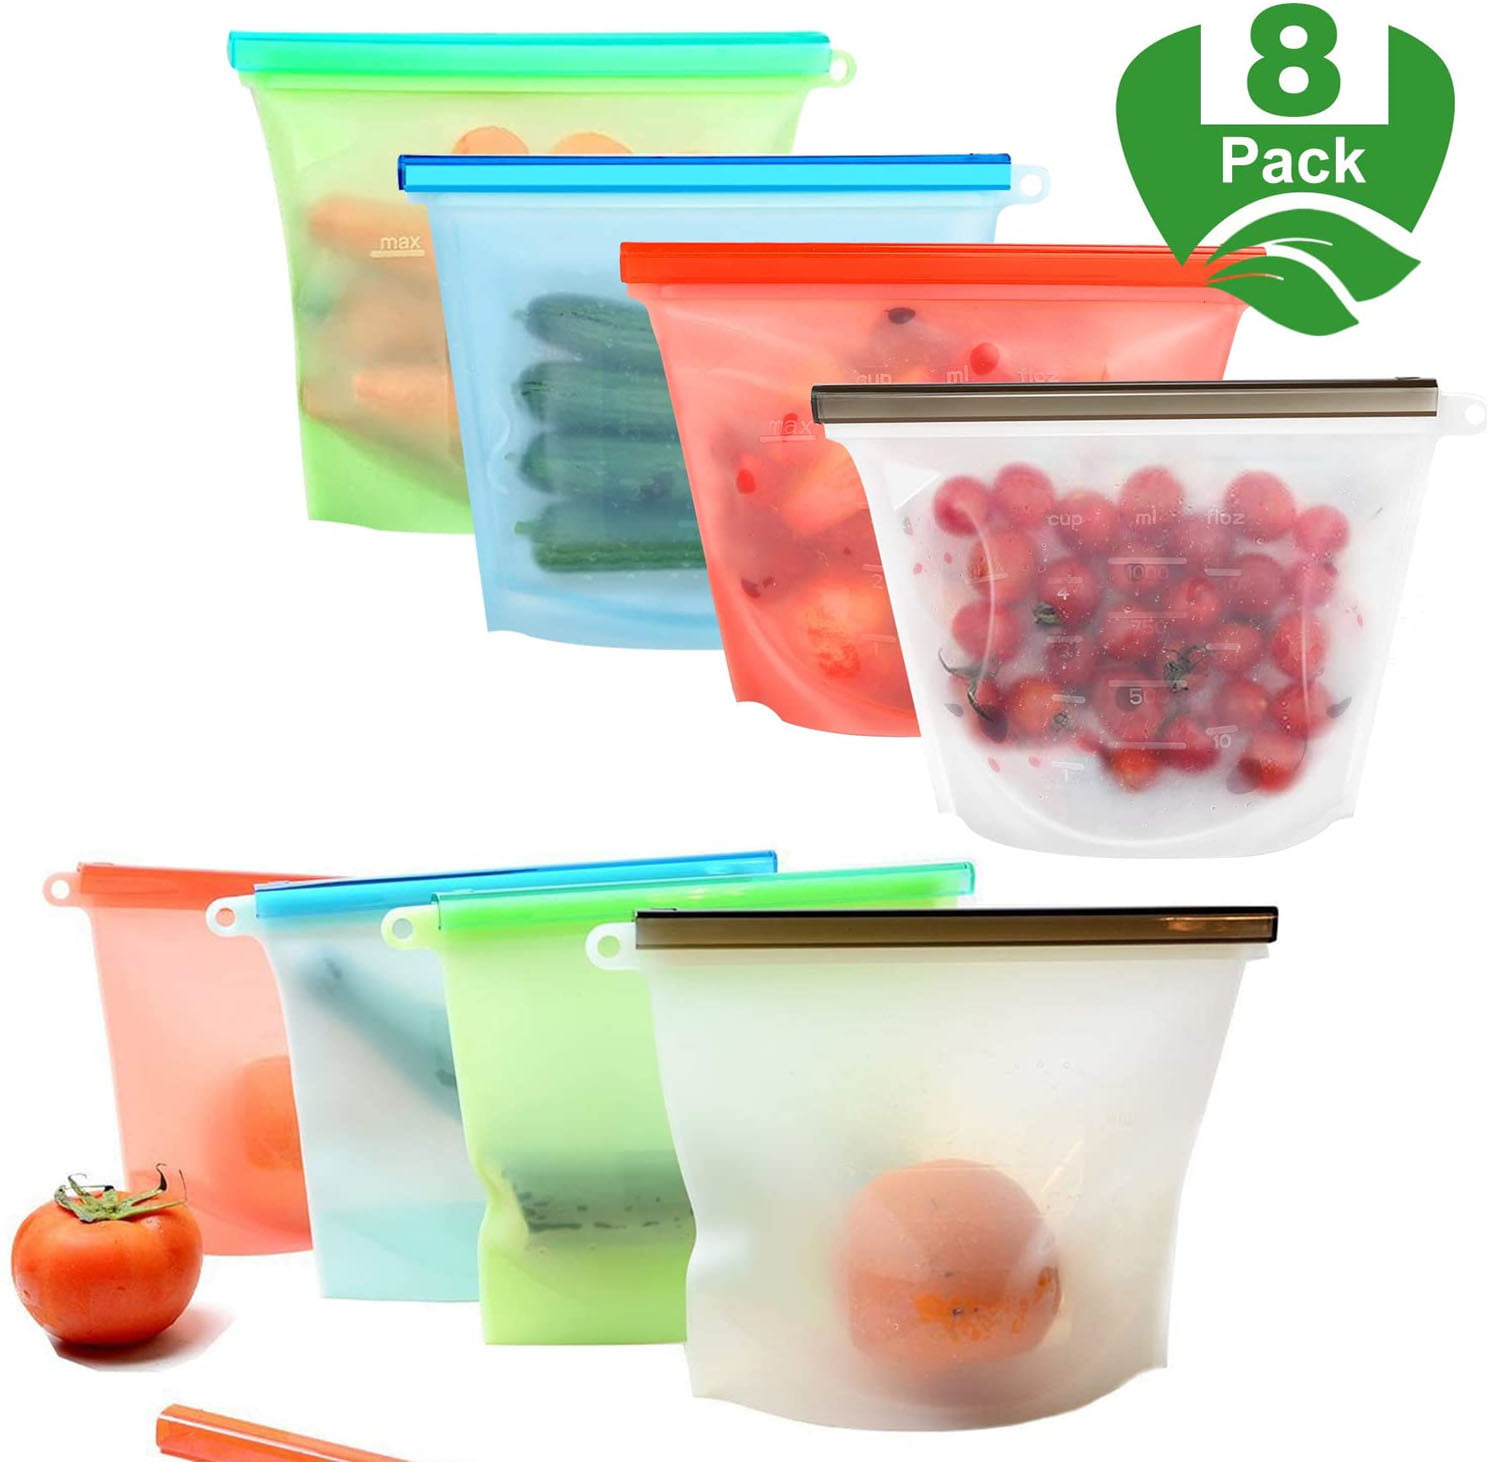 Reusable Silicone Food Storage Bags Freezer Airtight Seal Food Preservation Bags 